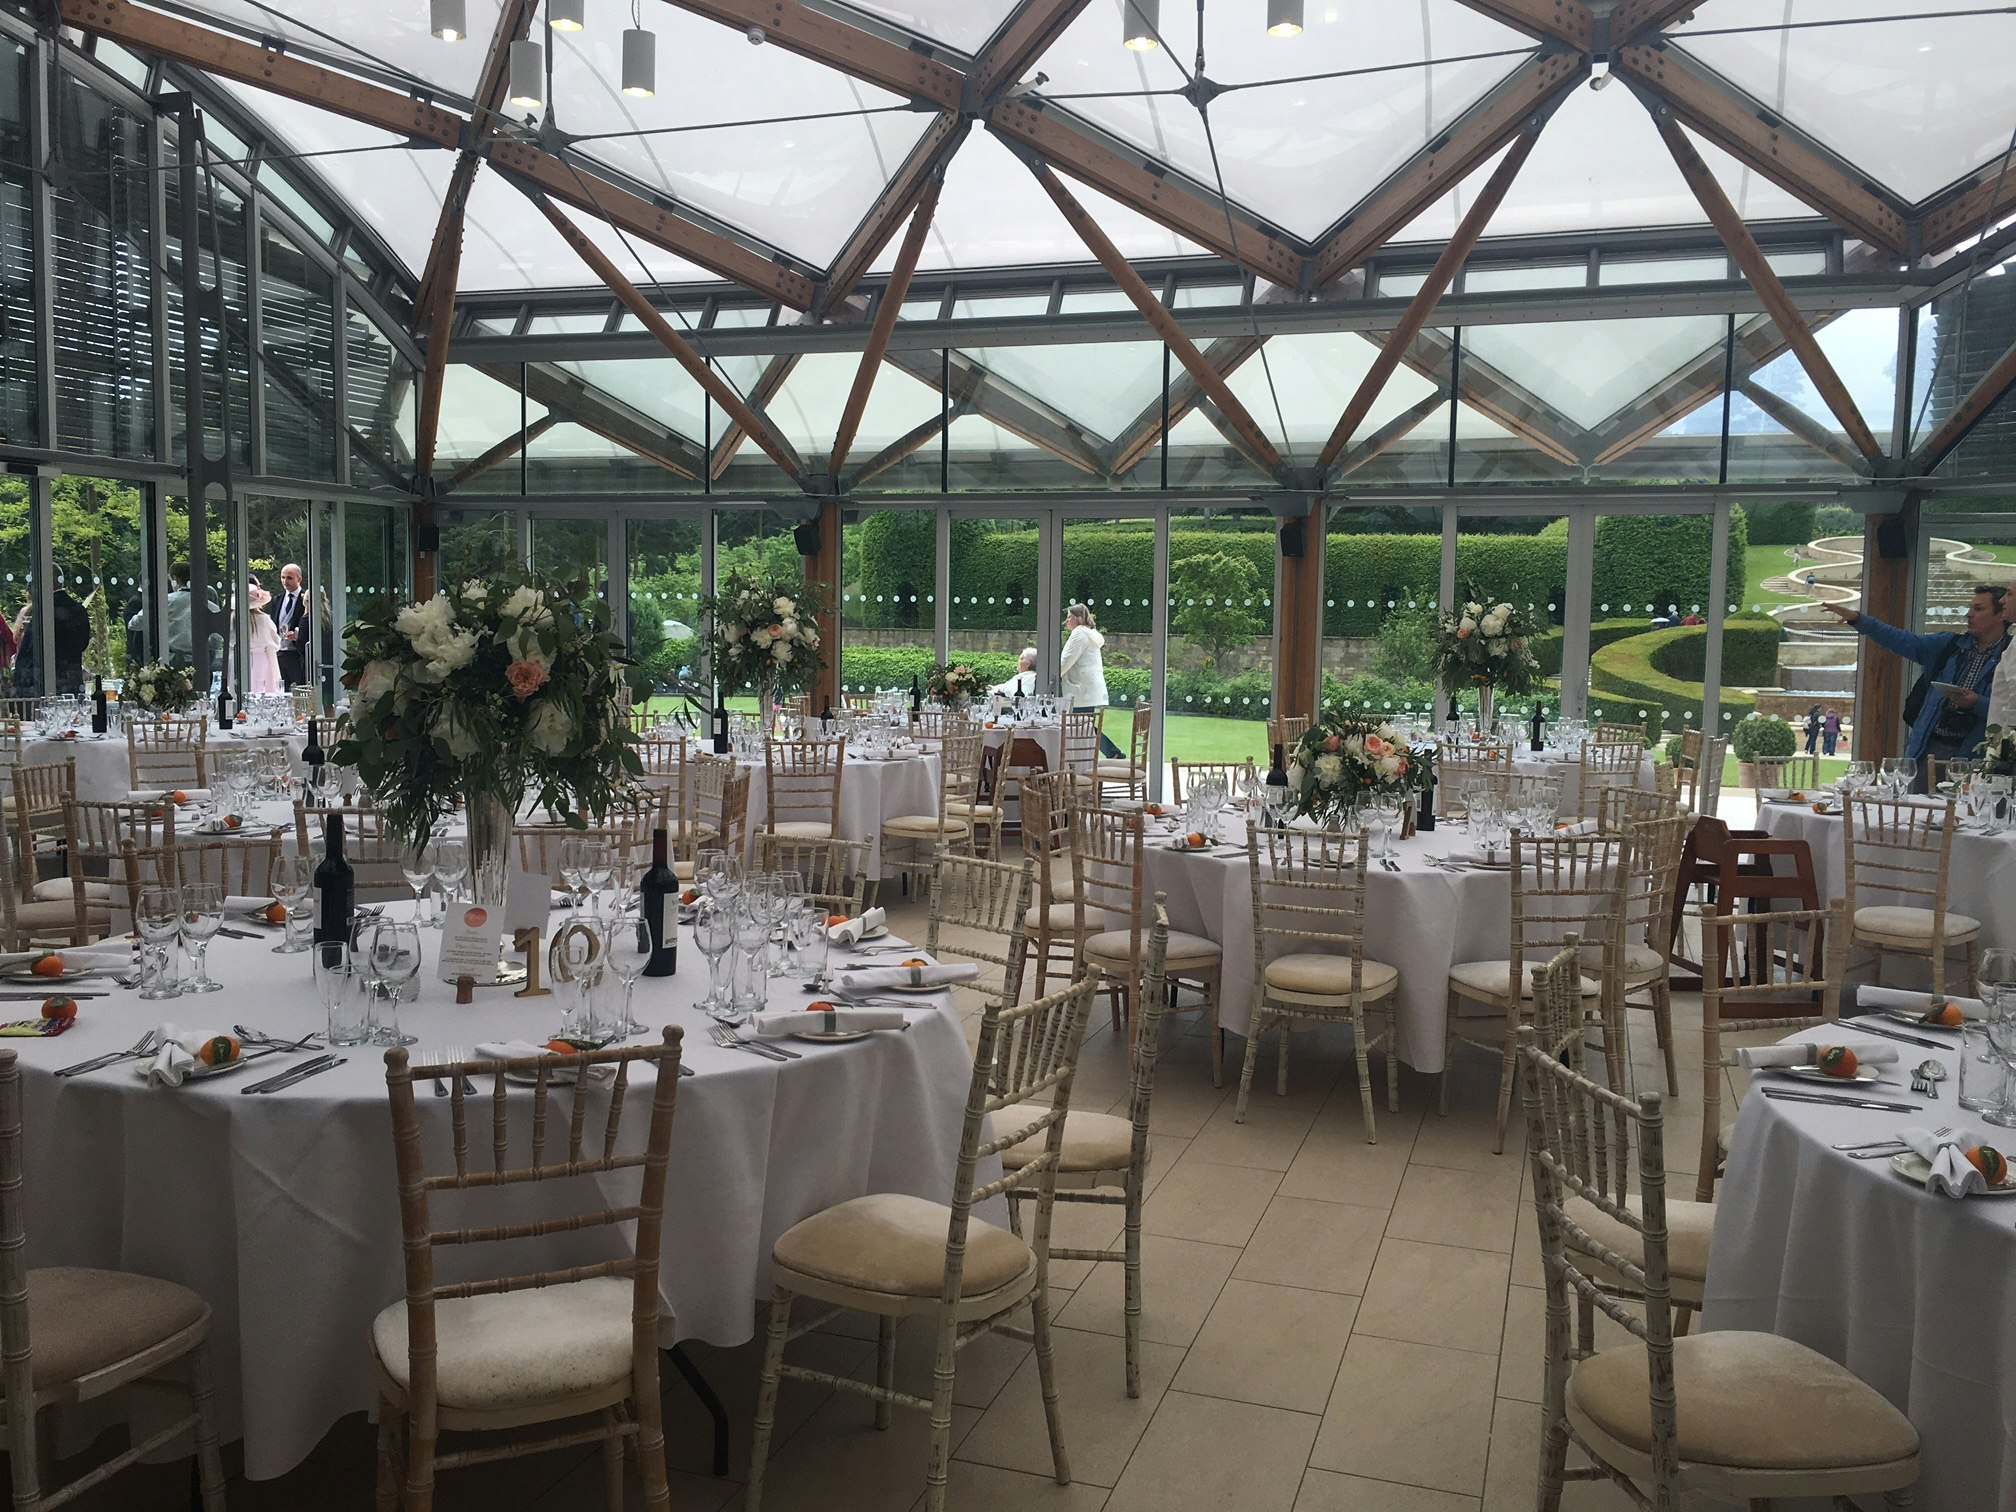 The Pavilion at The Alnwick Garden  - The Pavilion Room image 4